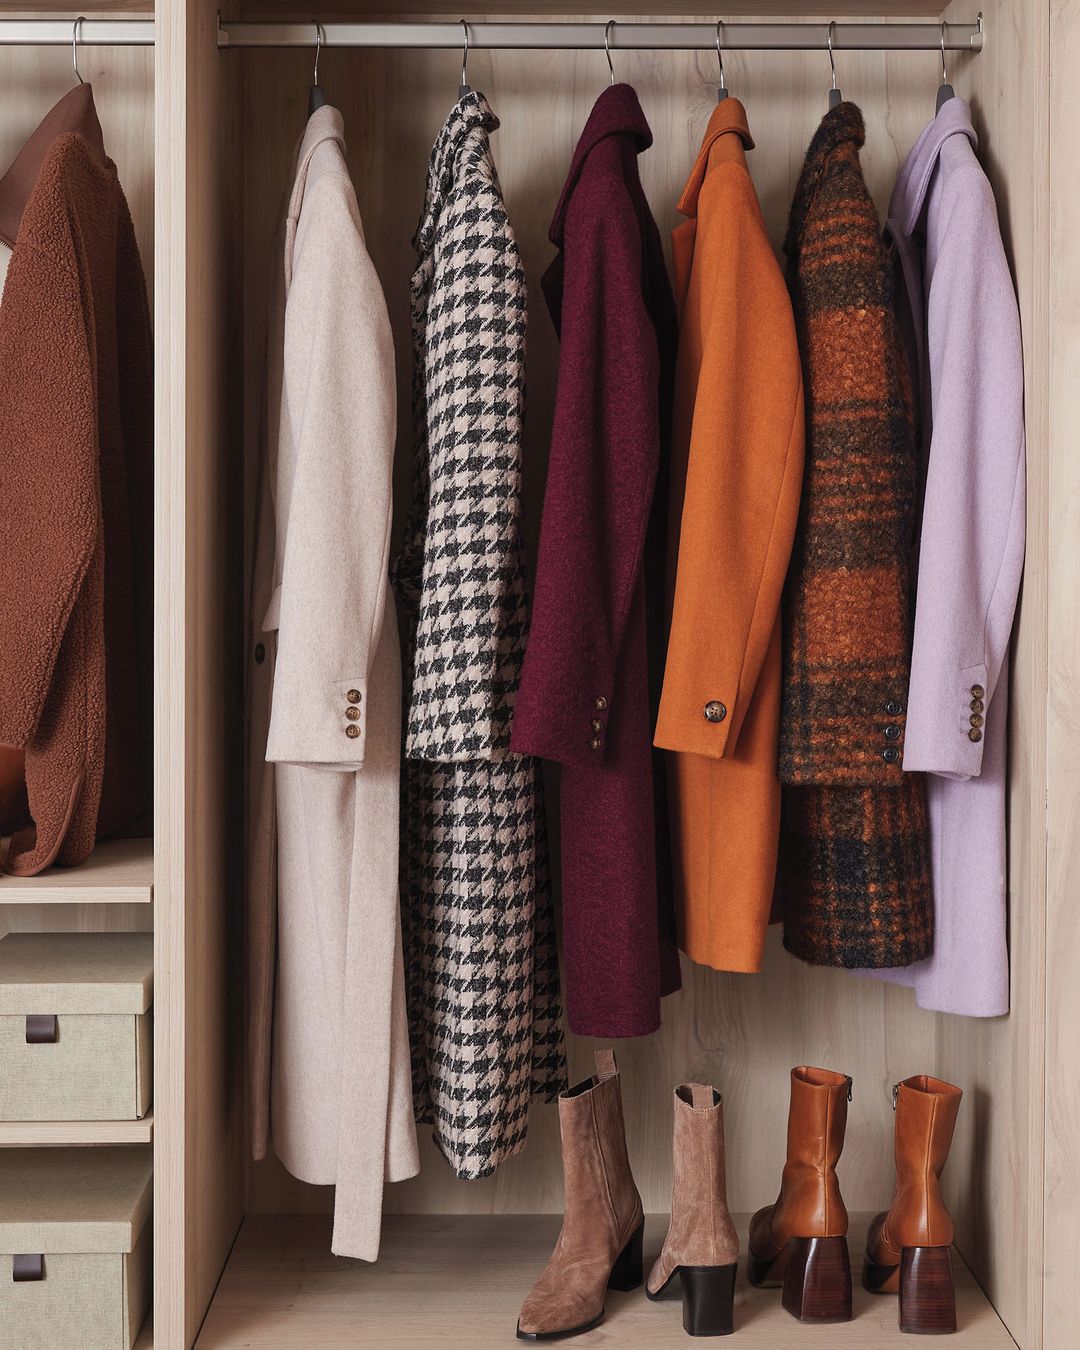 Line up of five coats hanging in a closet.